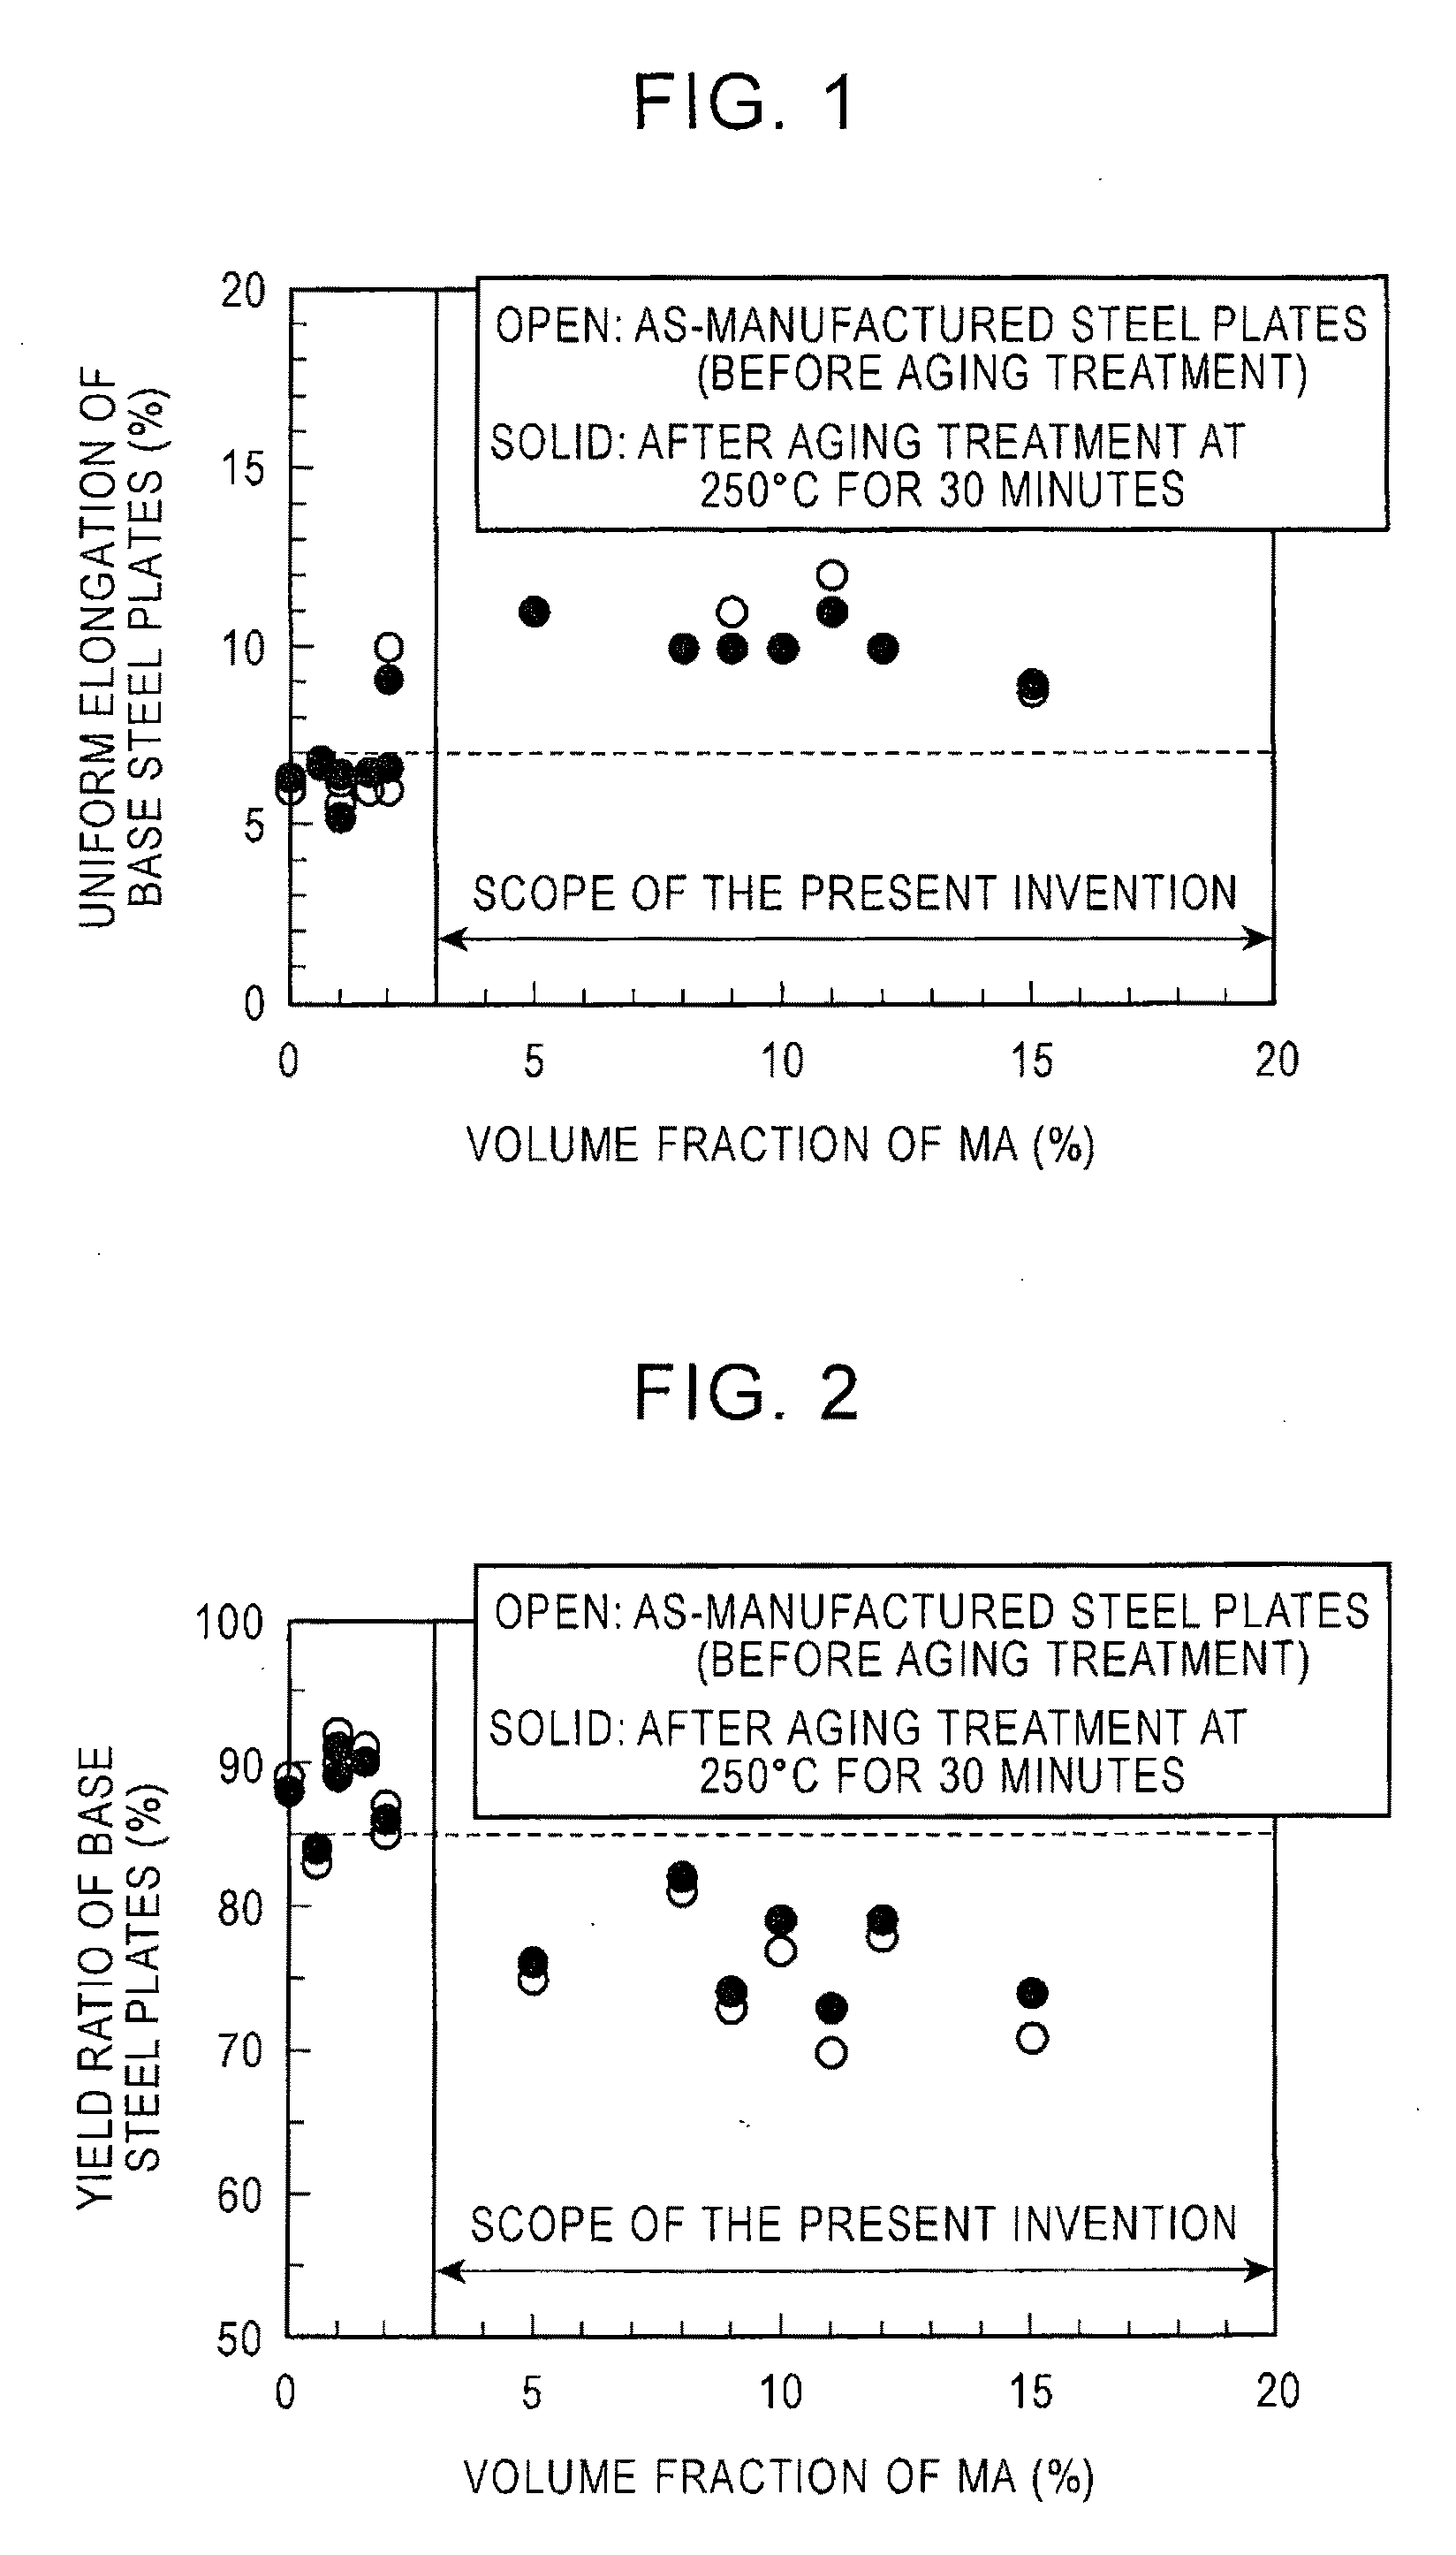 Low yield ratio, high strength and high uniform elongation steel plate and method for manufacturing the same